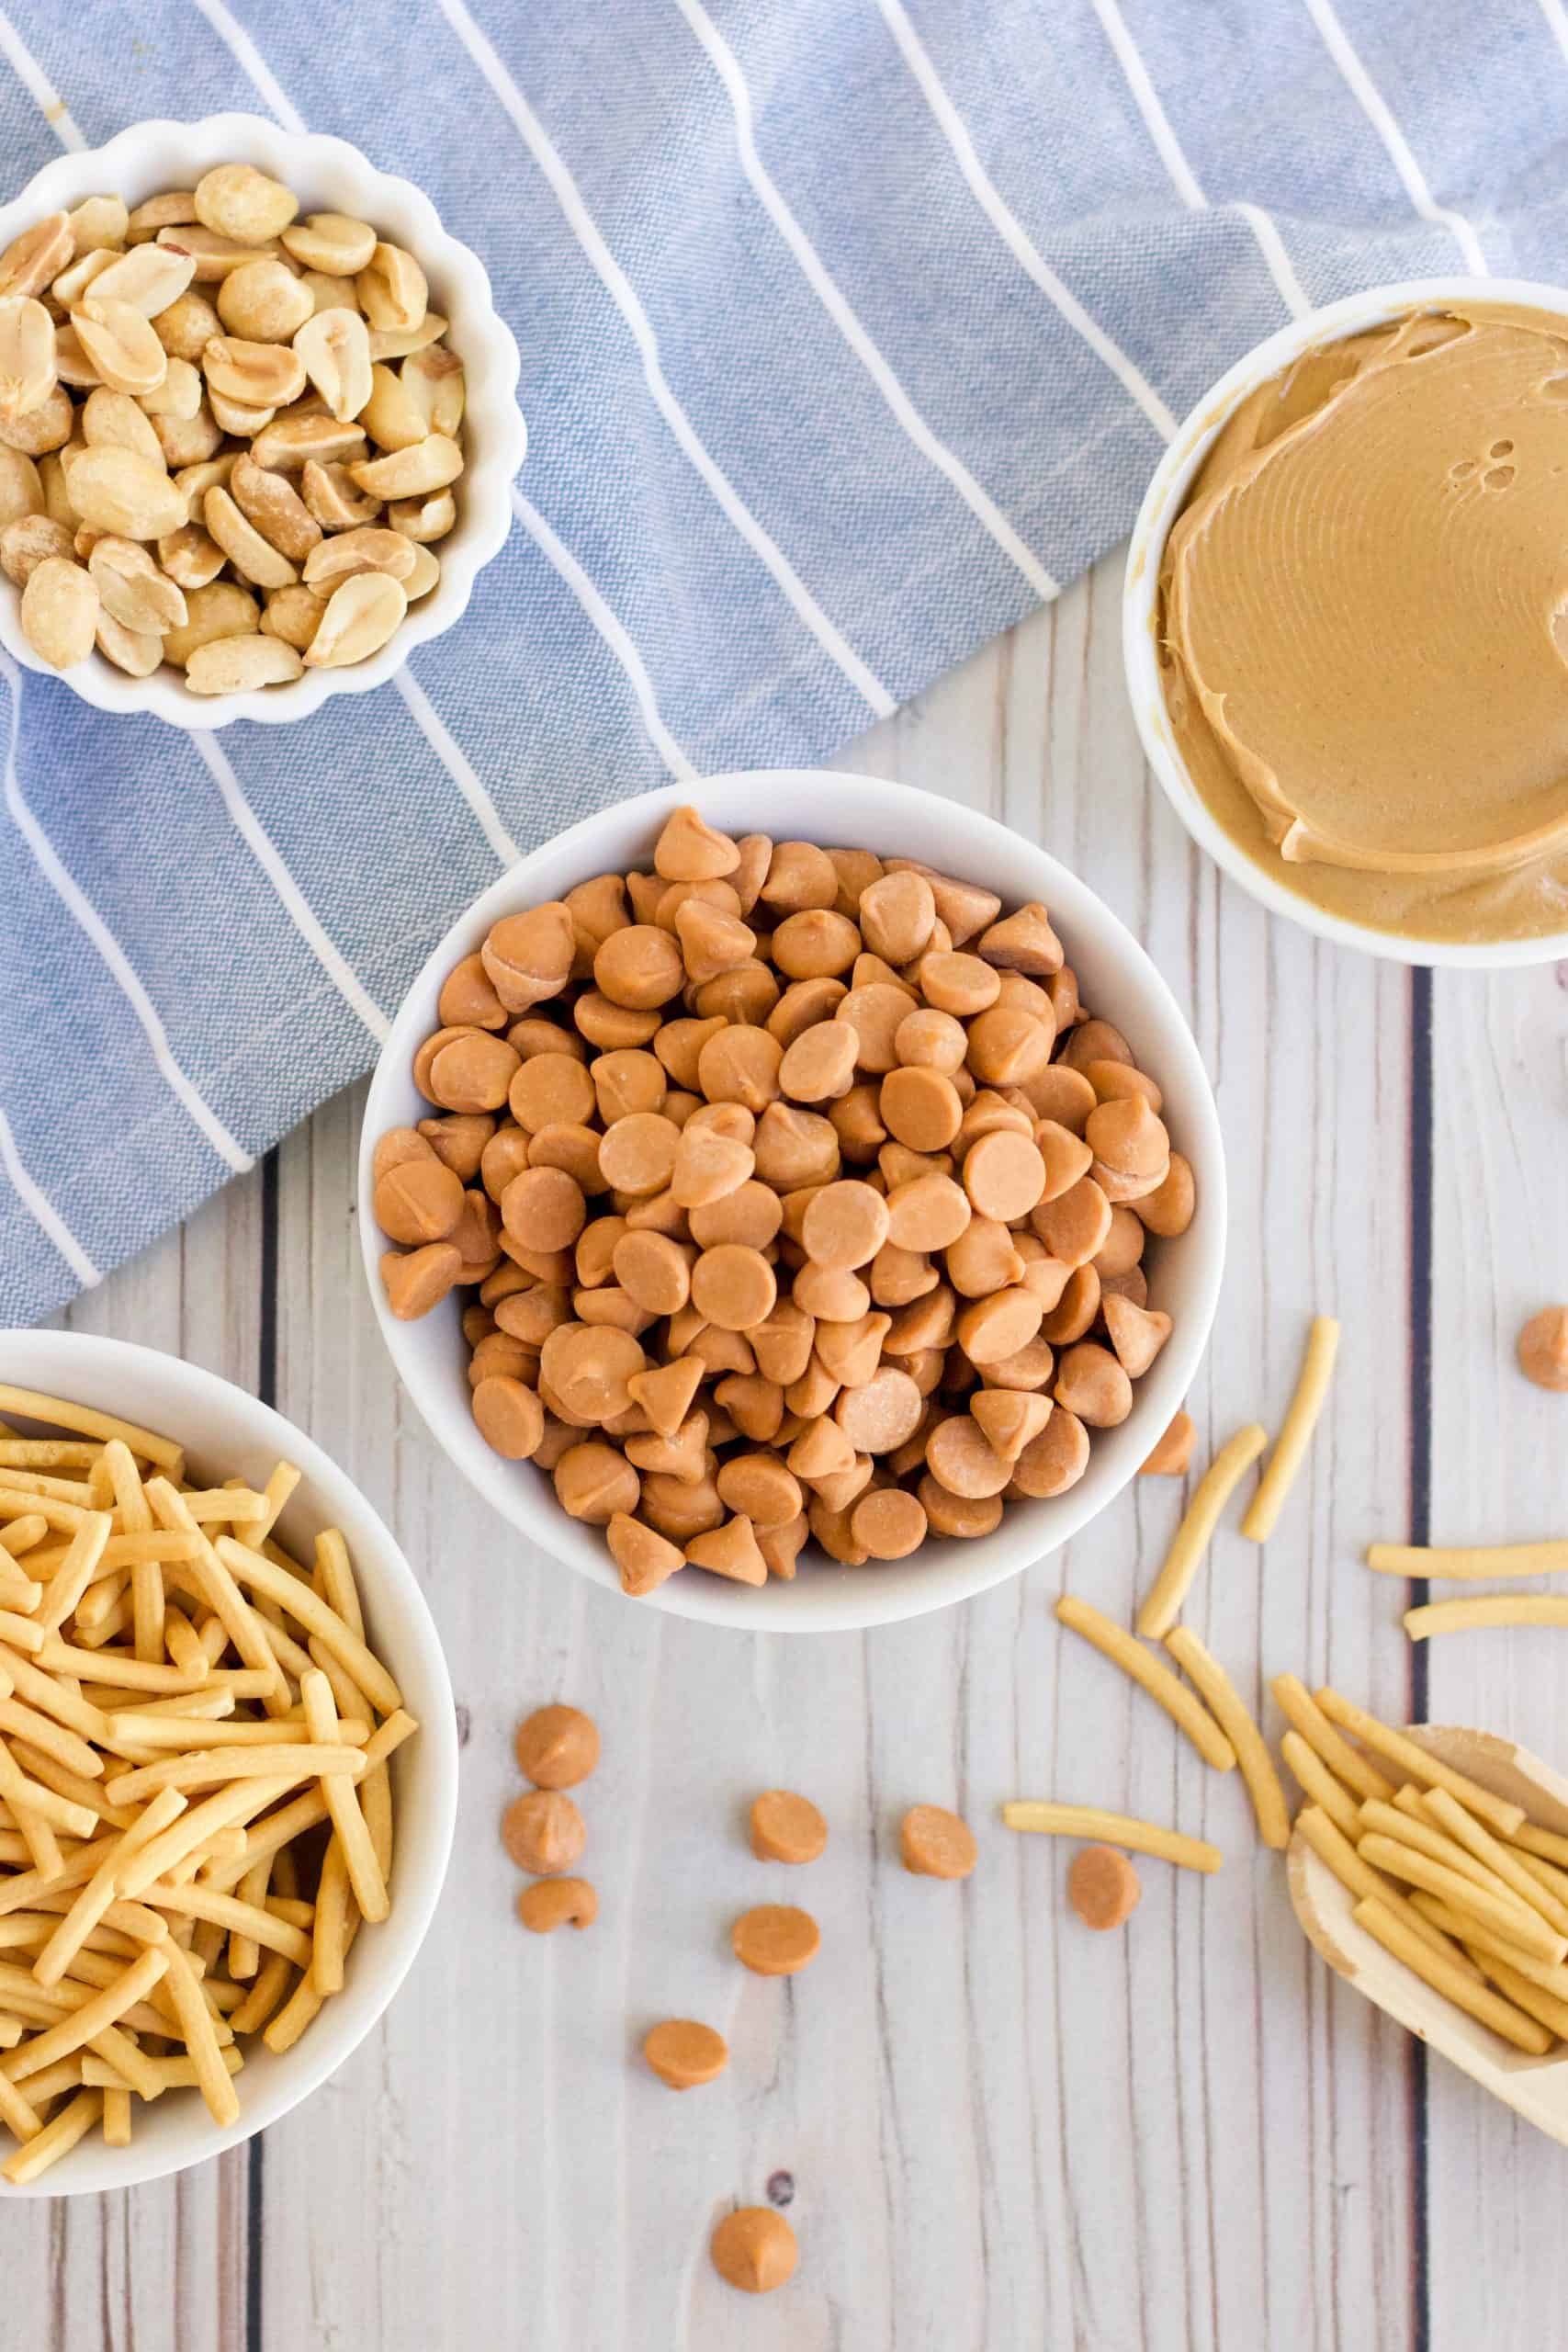 butterscotch chips, creamy peanut butter, chow mein noodles, roasted peanuts.